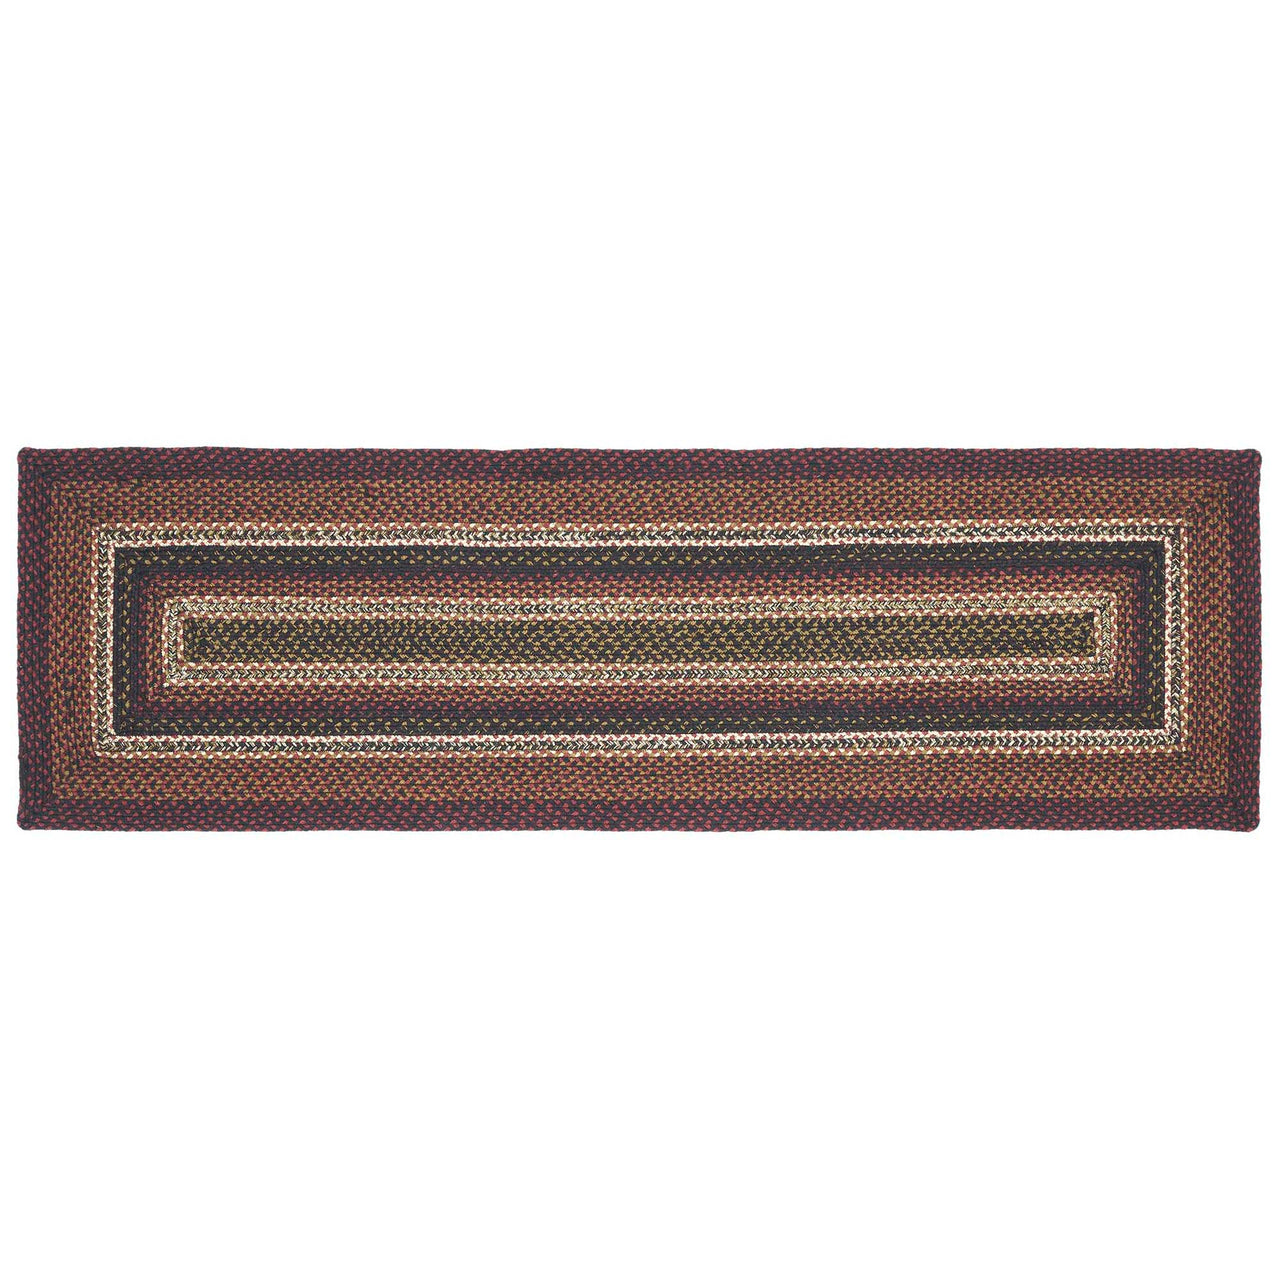 Beckham Jute Braided Rug/Runner Rect with Rug Pad 22"x72" VHC Brands